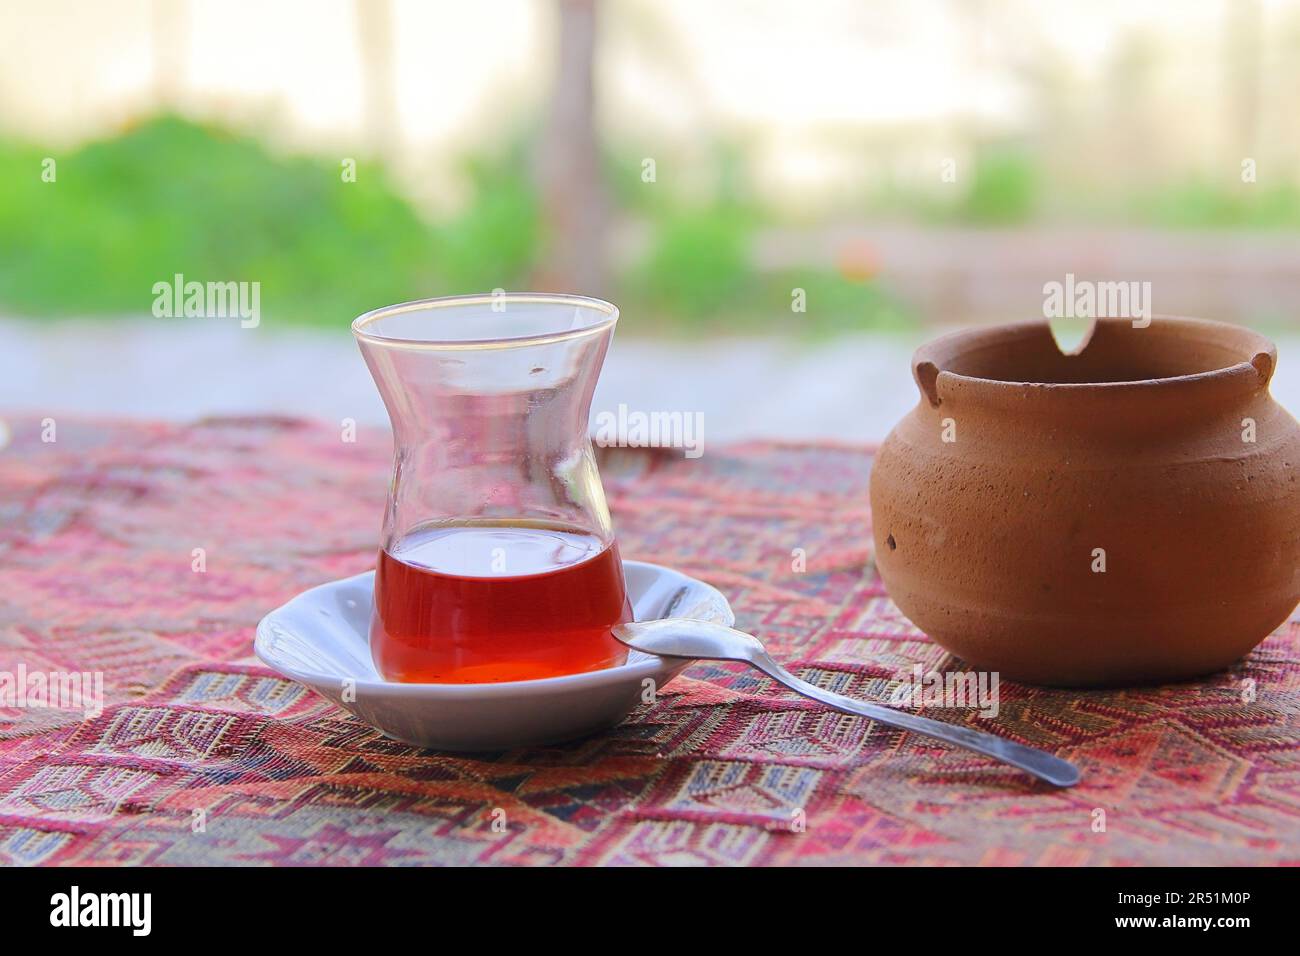 Photo taken in Turkey. The picture shows a small glass of strong tea called - armouts on a traditional Turkish rug spread out on the table. Near a pot Stock Photo